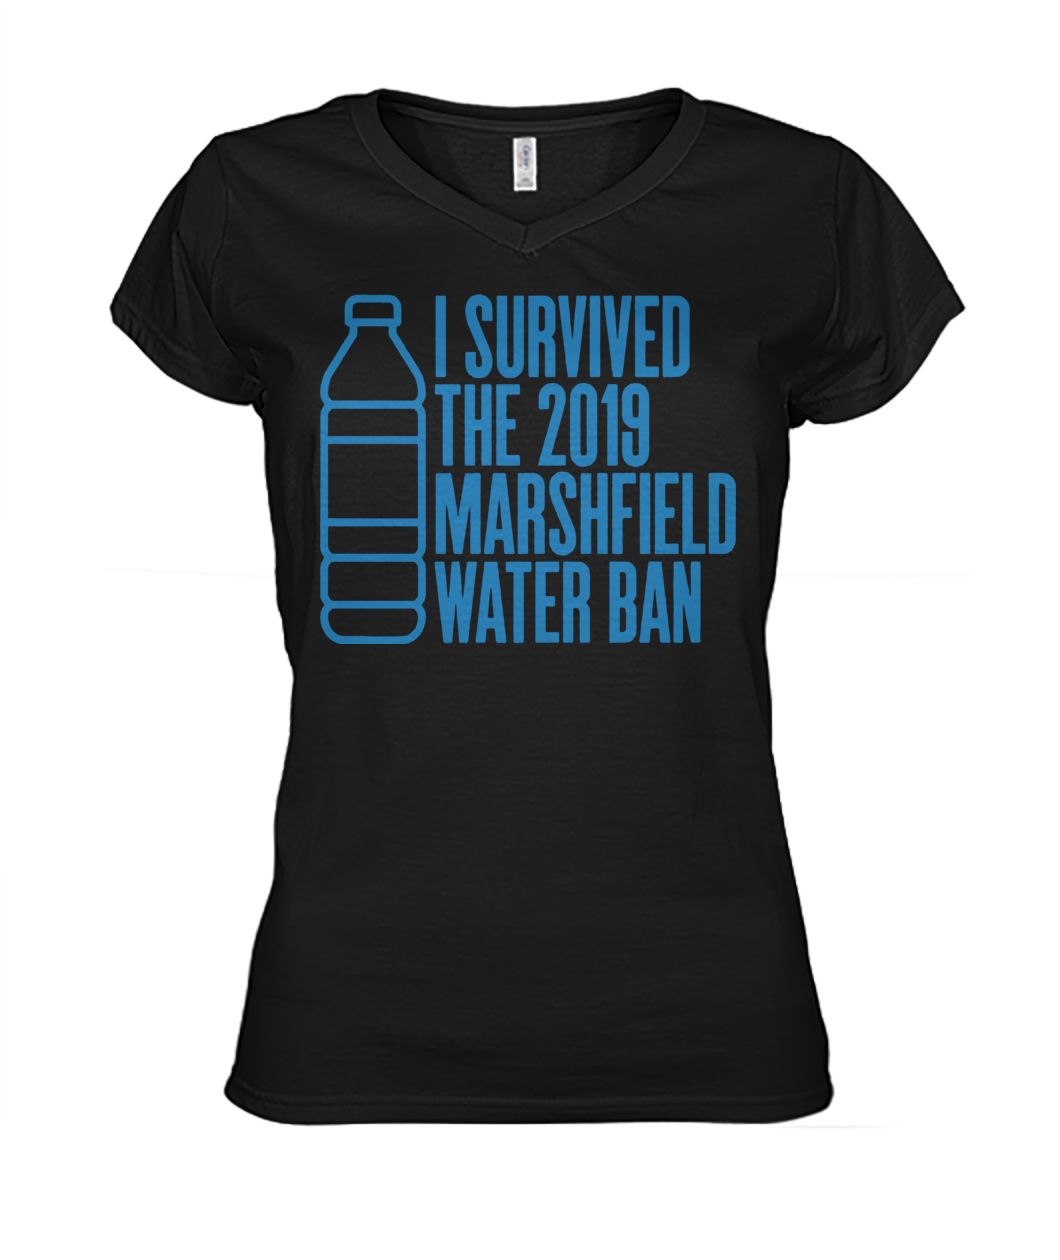 I survived the 2019 marshfield water ban women's v-neck